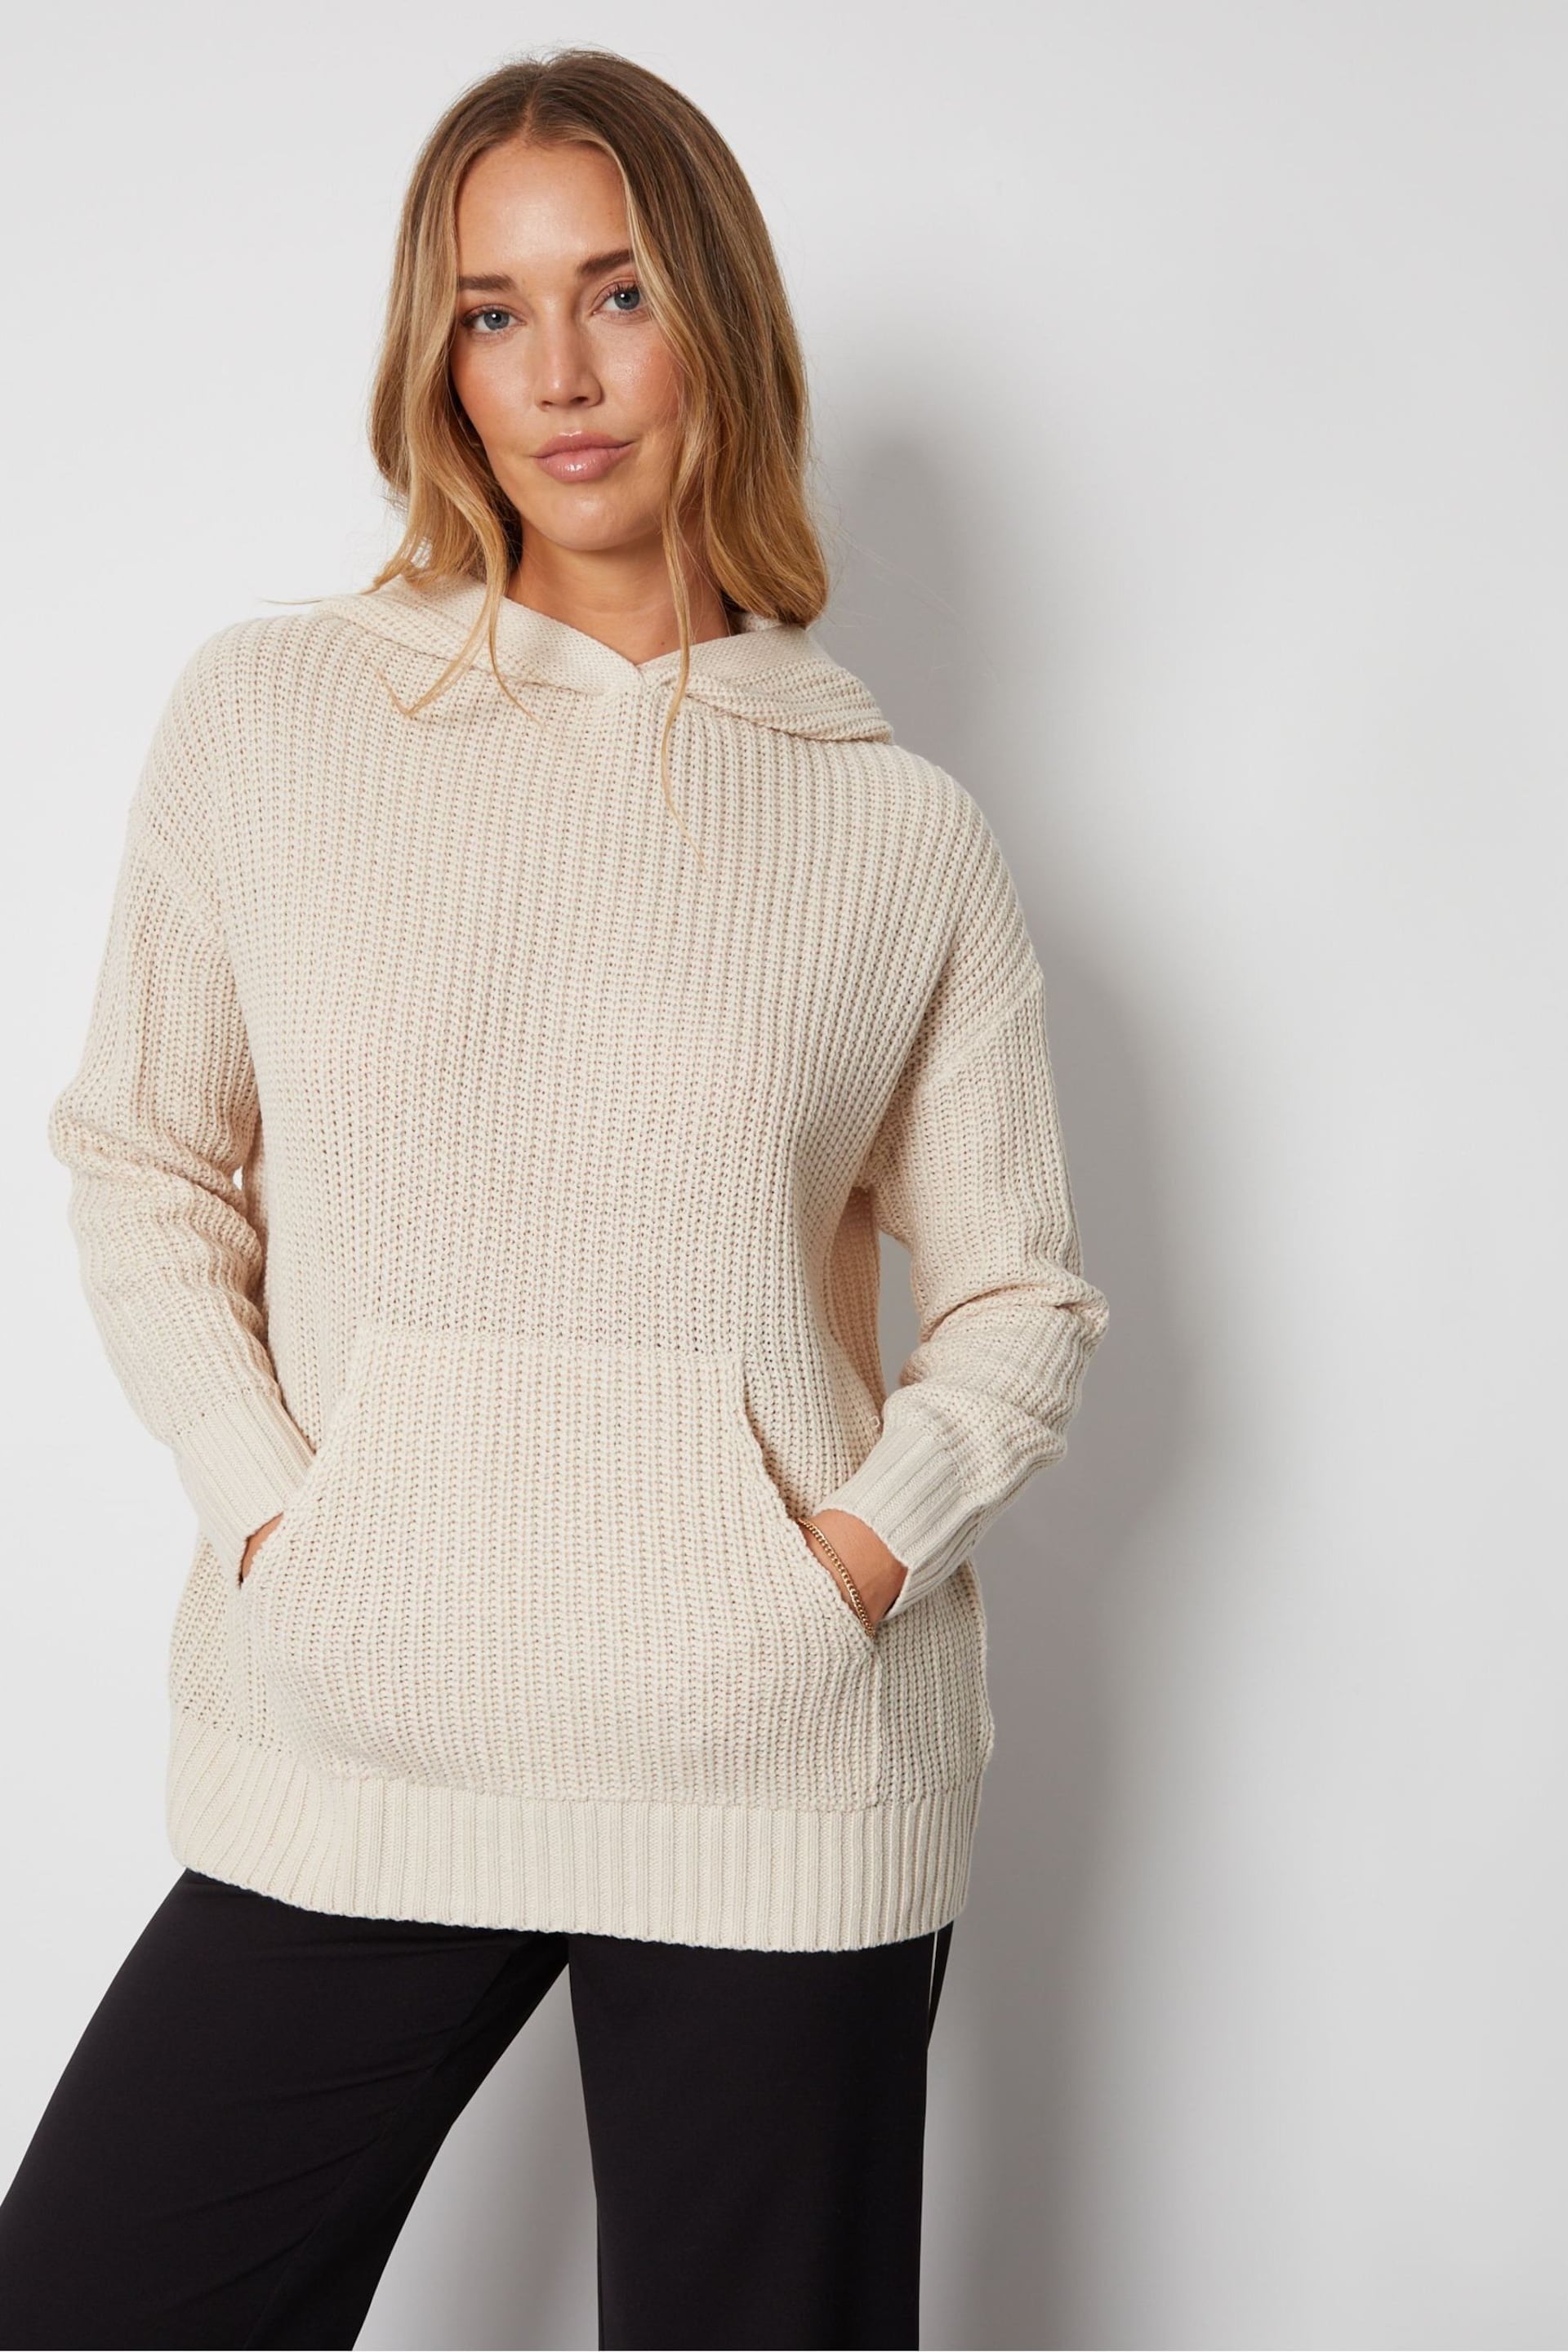 Threadbare Brown Hooded Knitted Jumper - Image 1 of 5